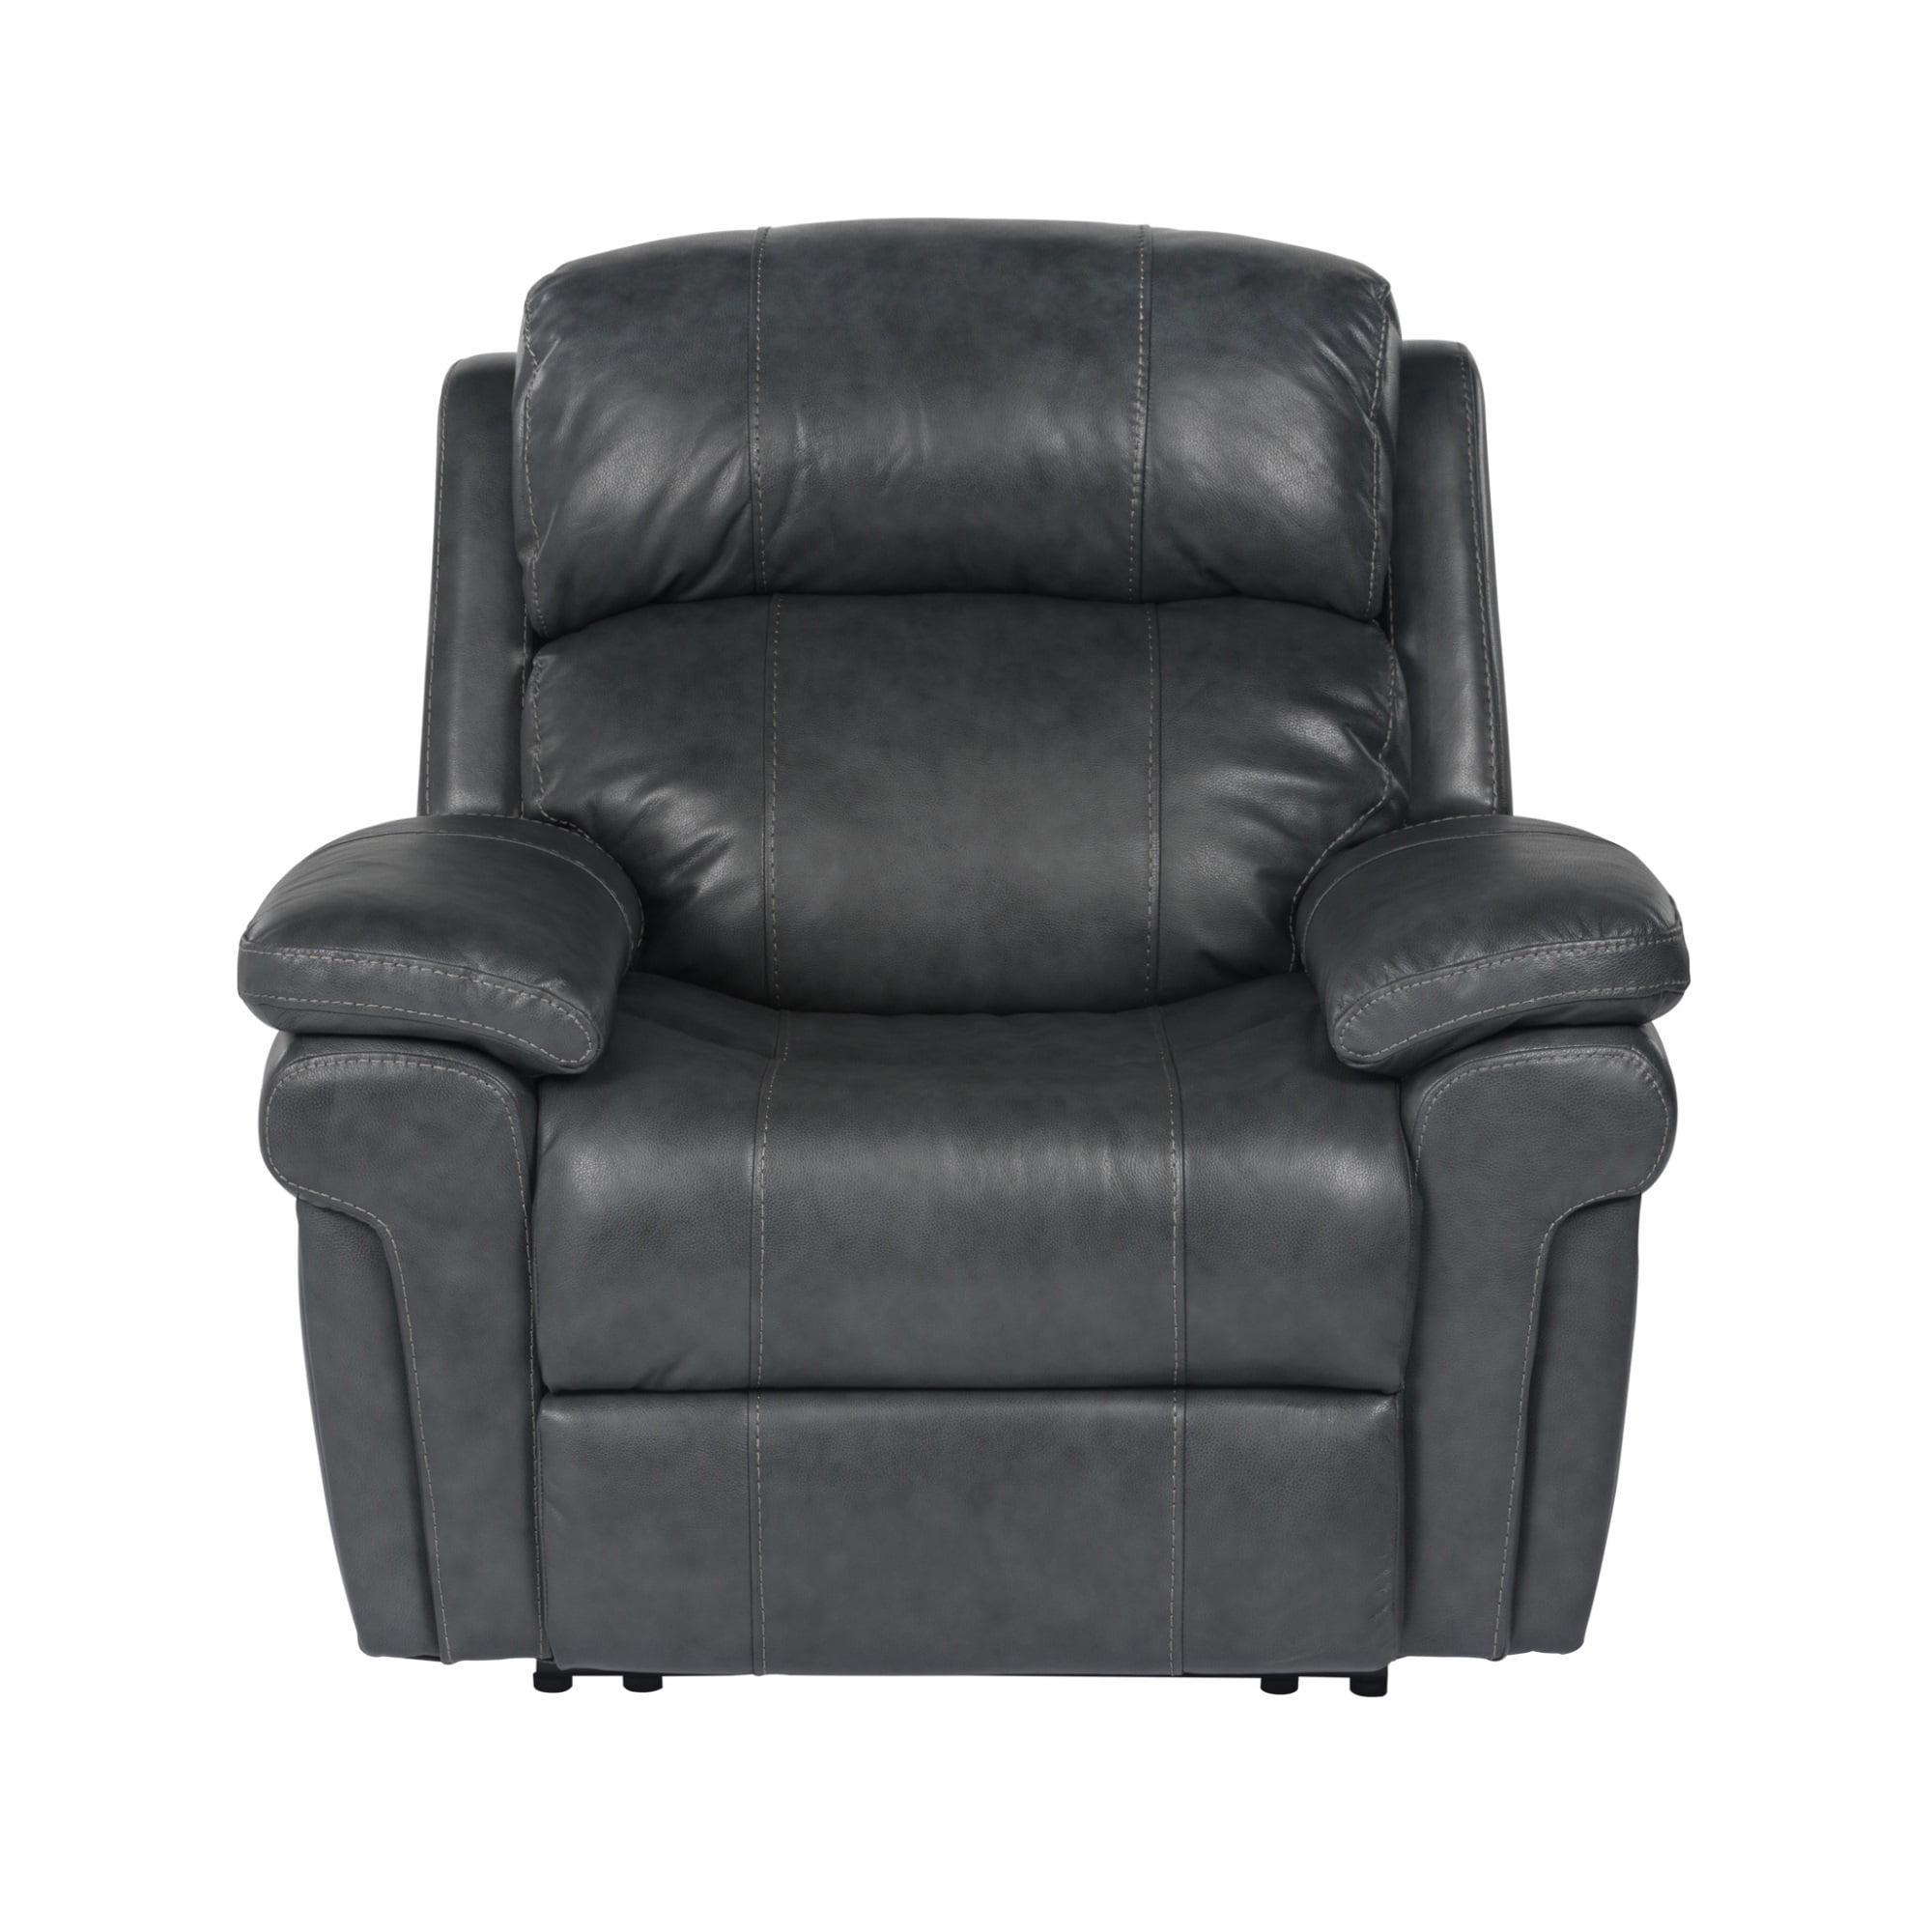 Traditional Gray Leather Power Recliner with Wood Accents